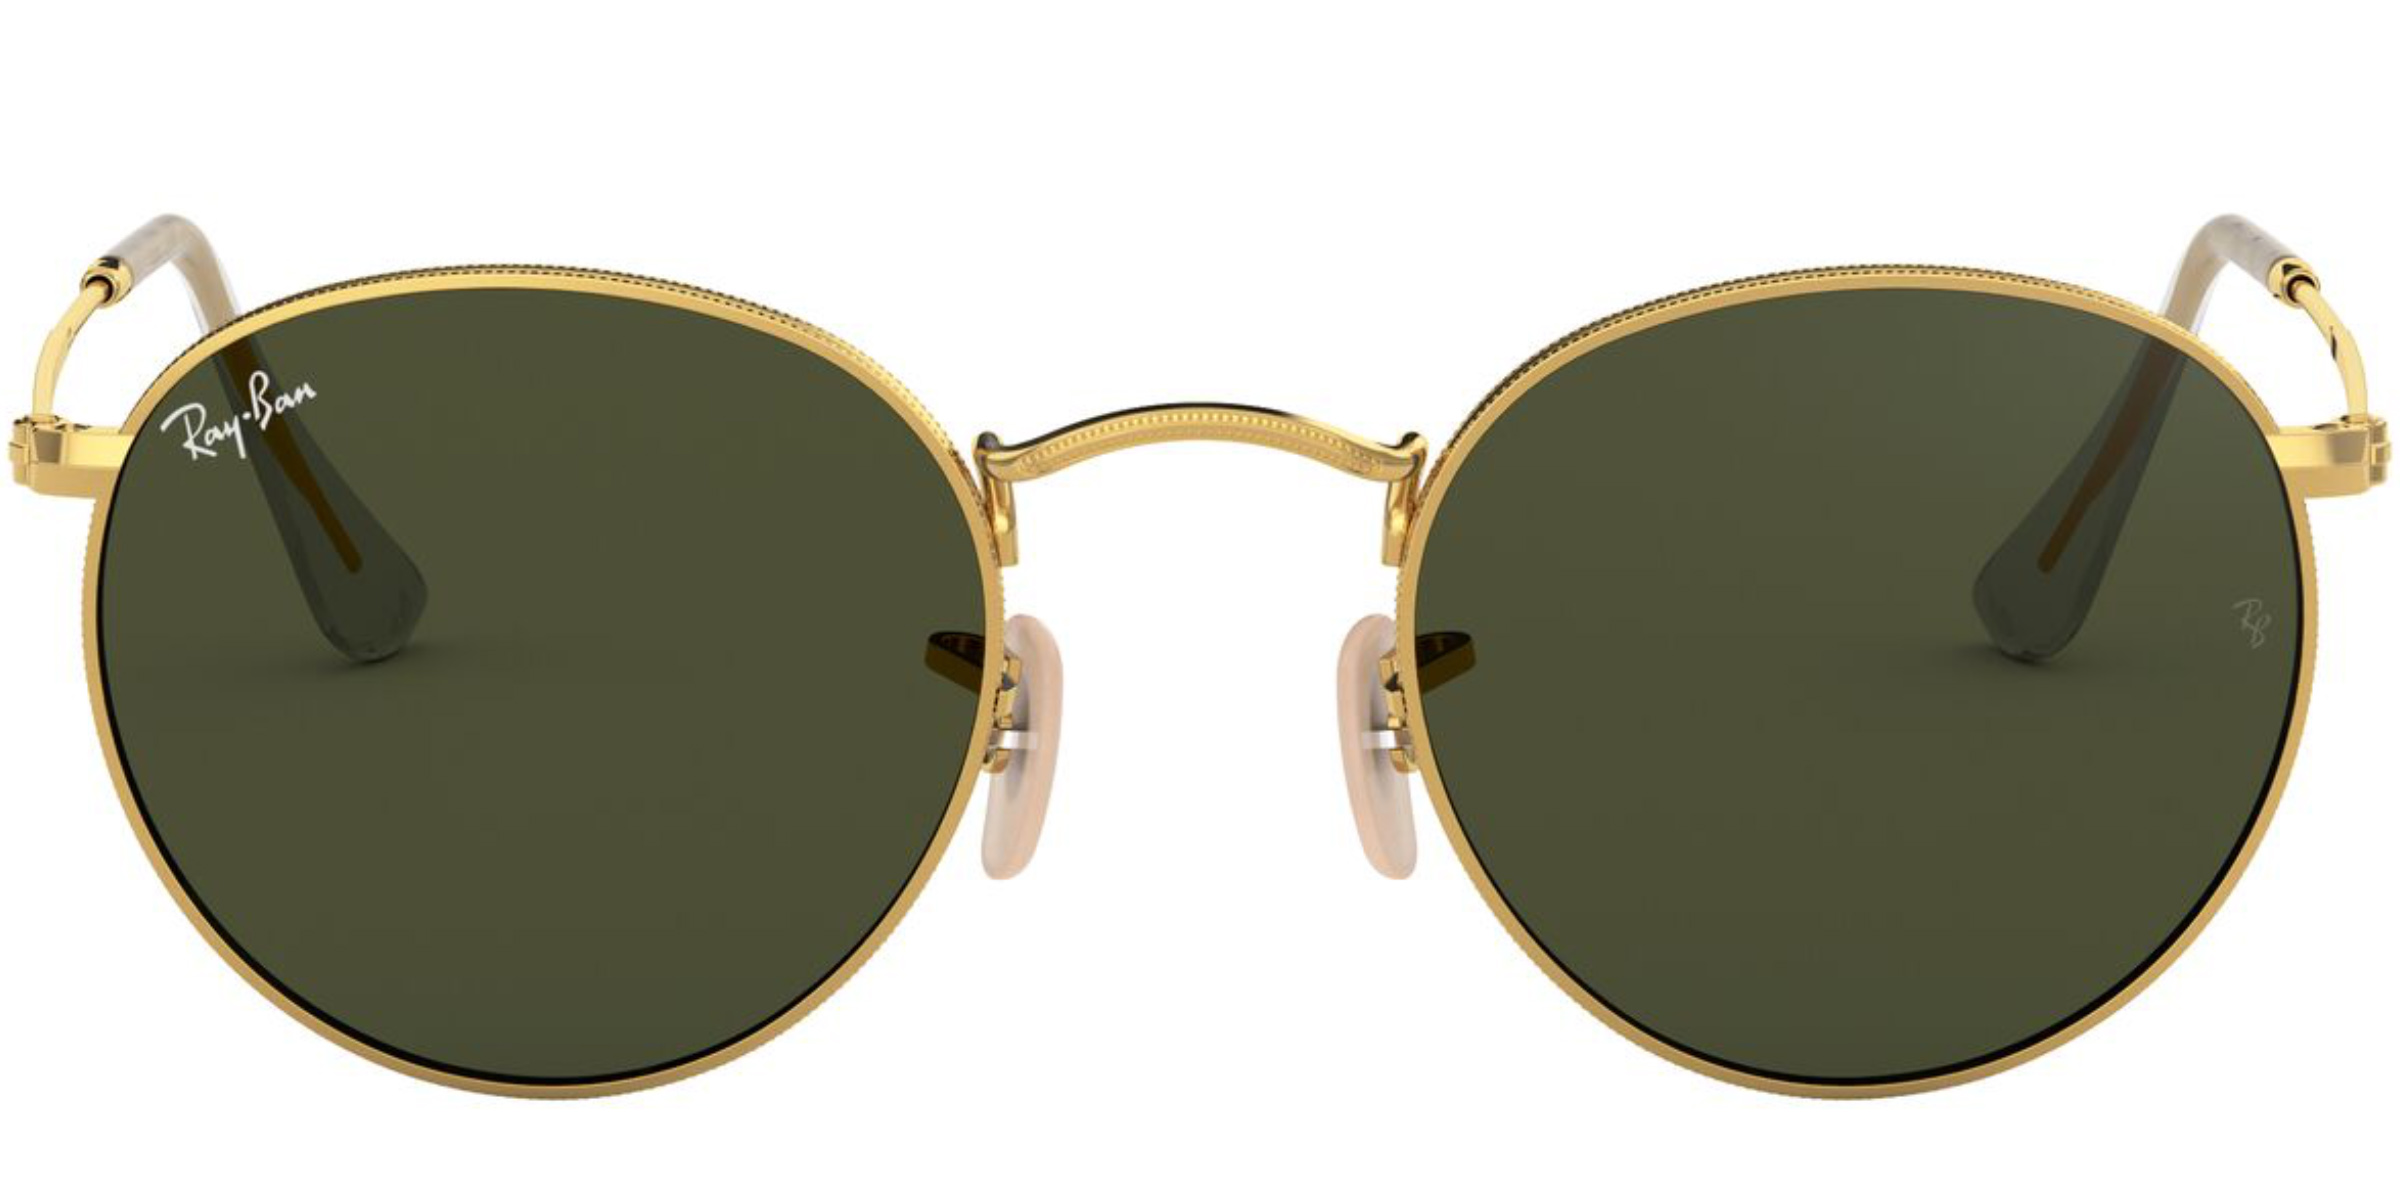 Buy RayBan RB3447 sunglasses for men or women at For Eyes